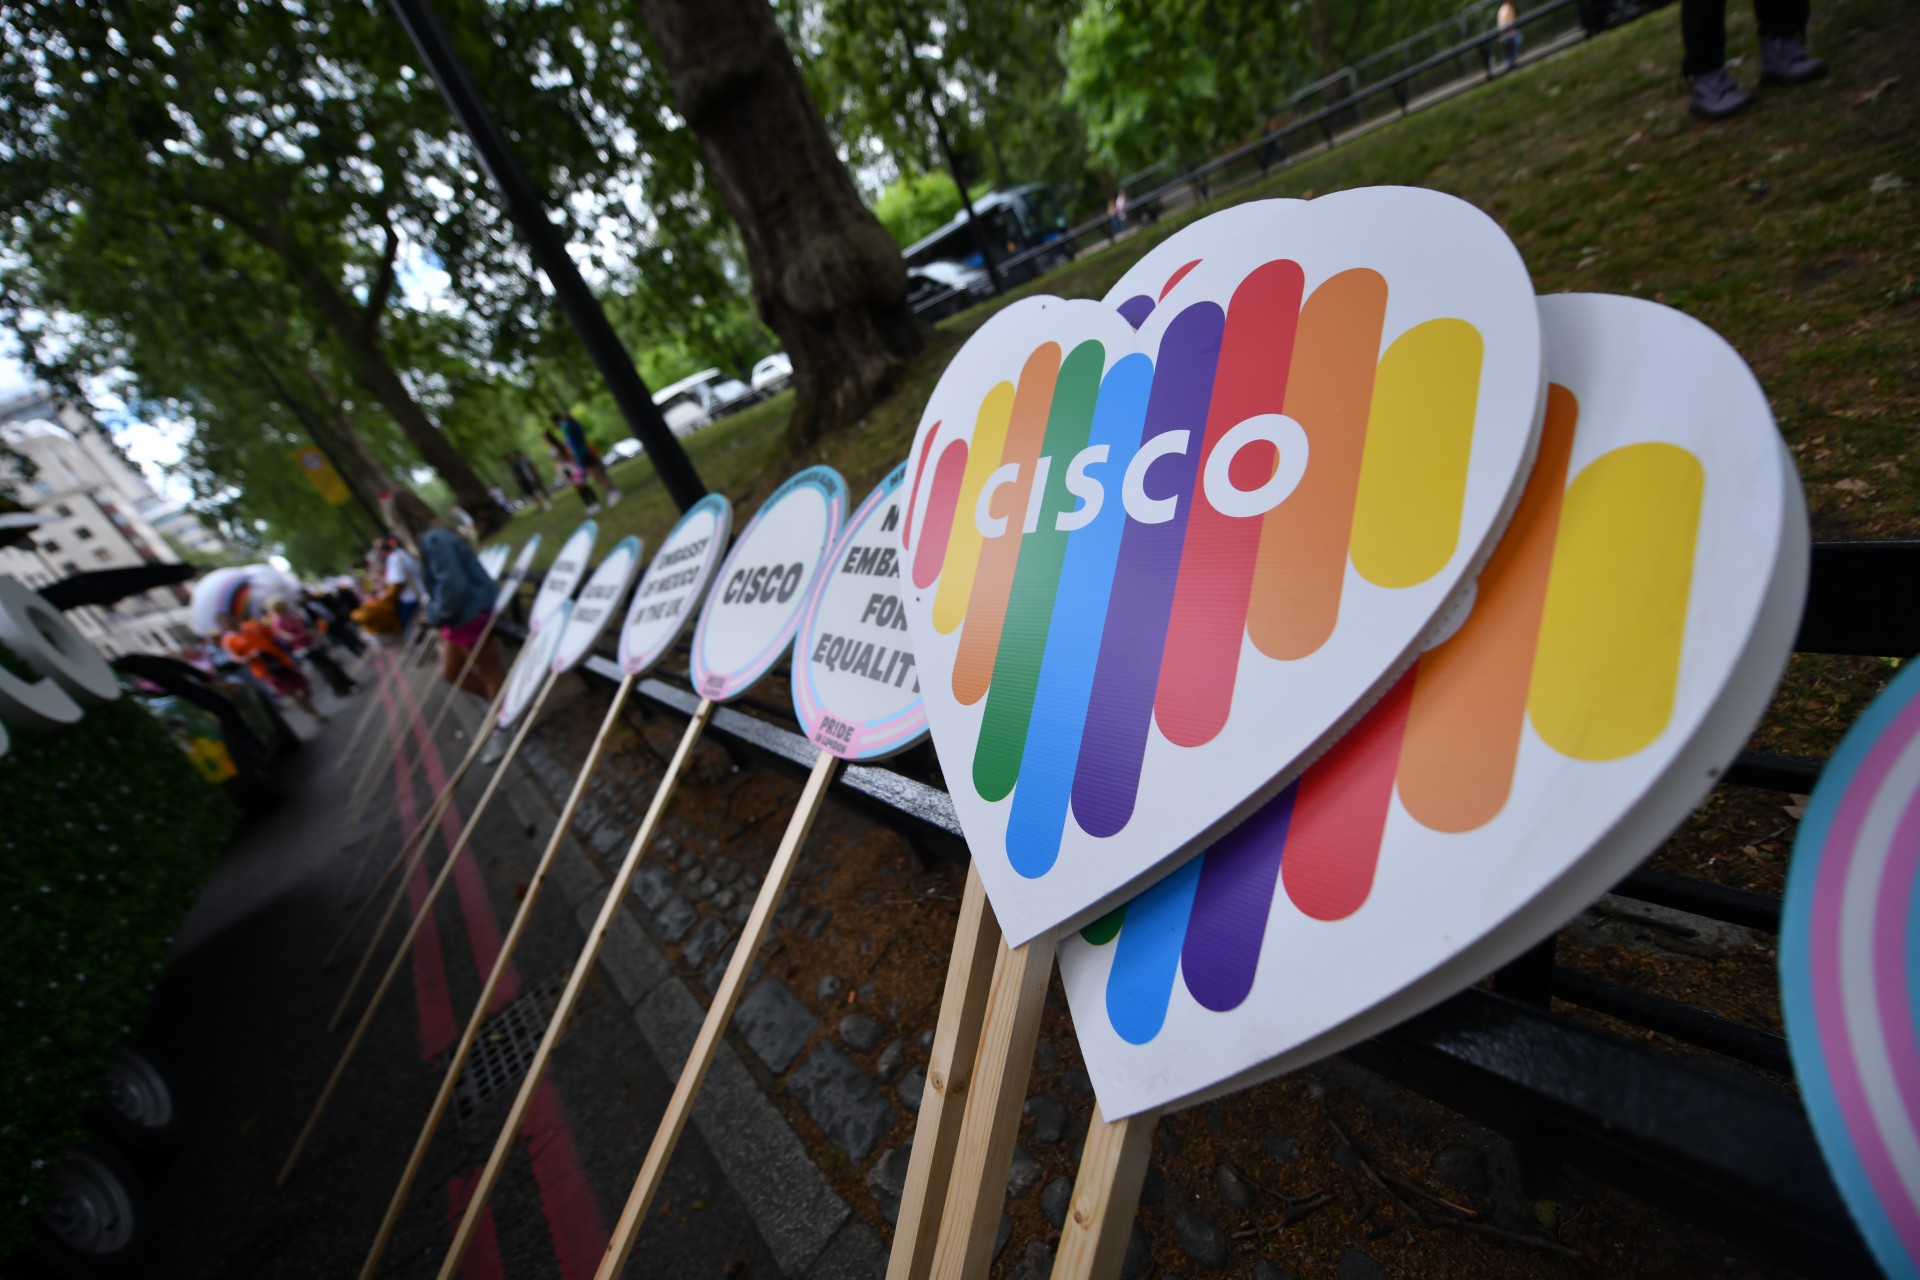 A stack of rainbow-colored Cisco pride logo signs, and other signs leaning on a fence in a park.